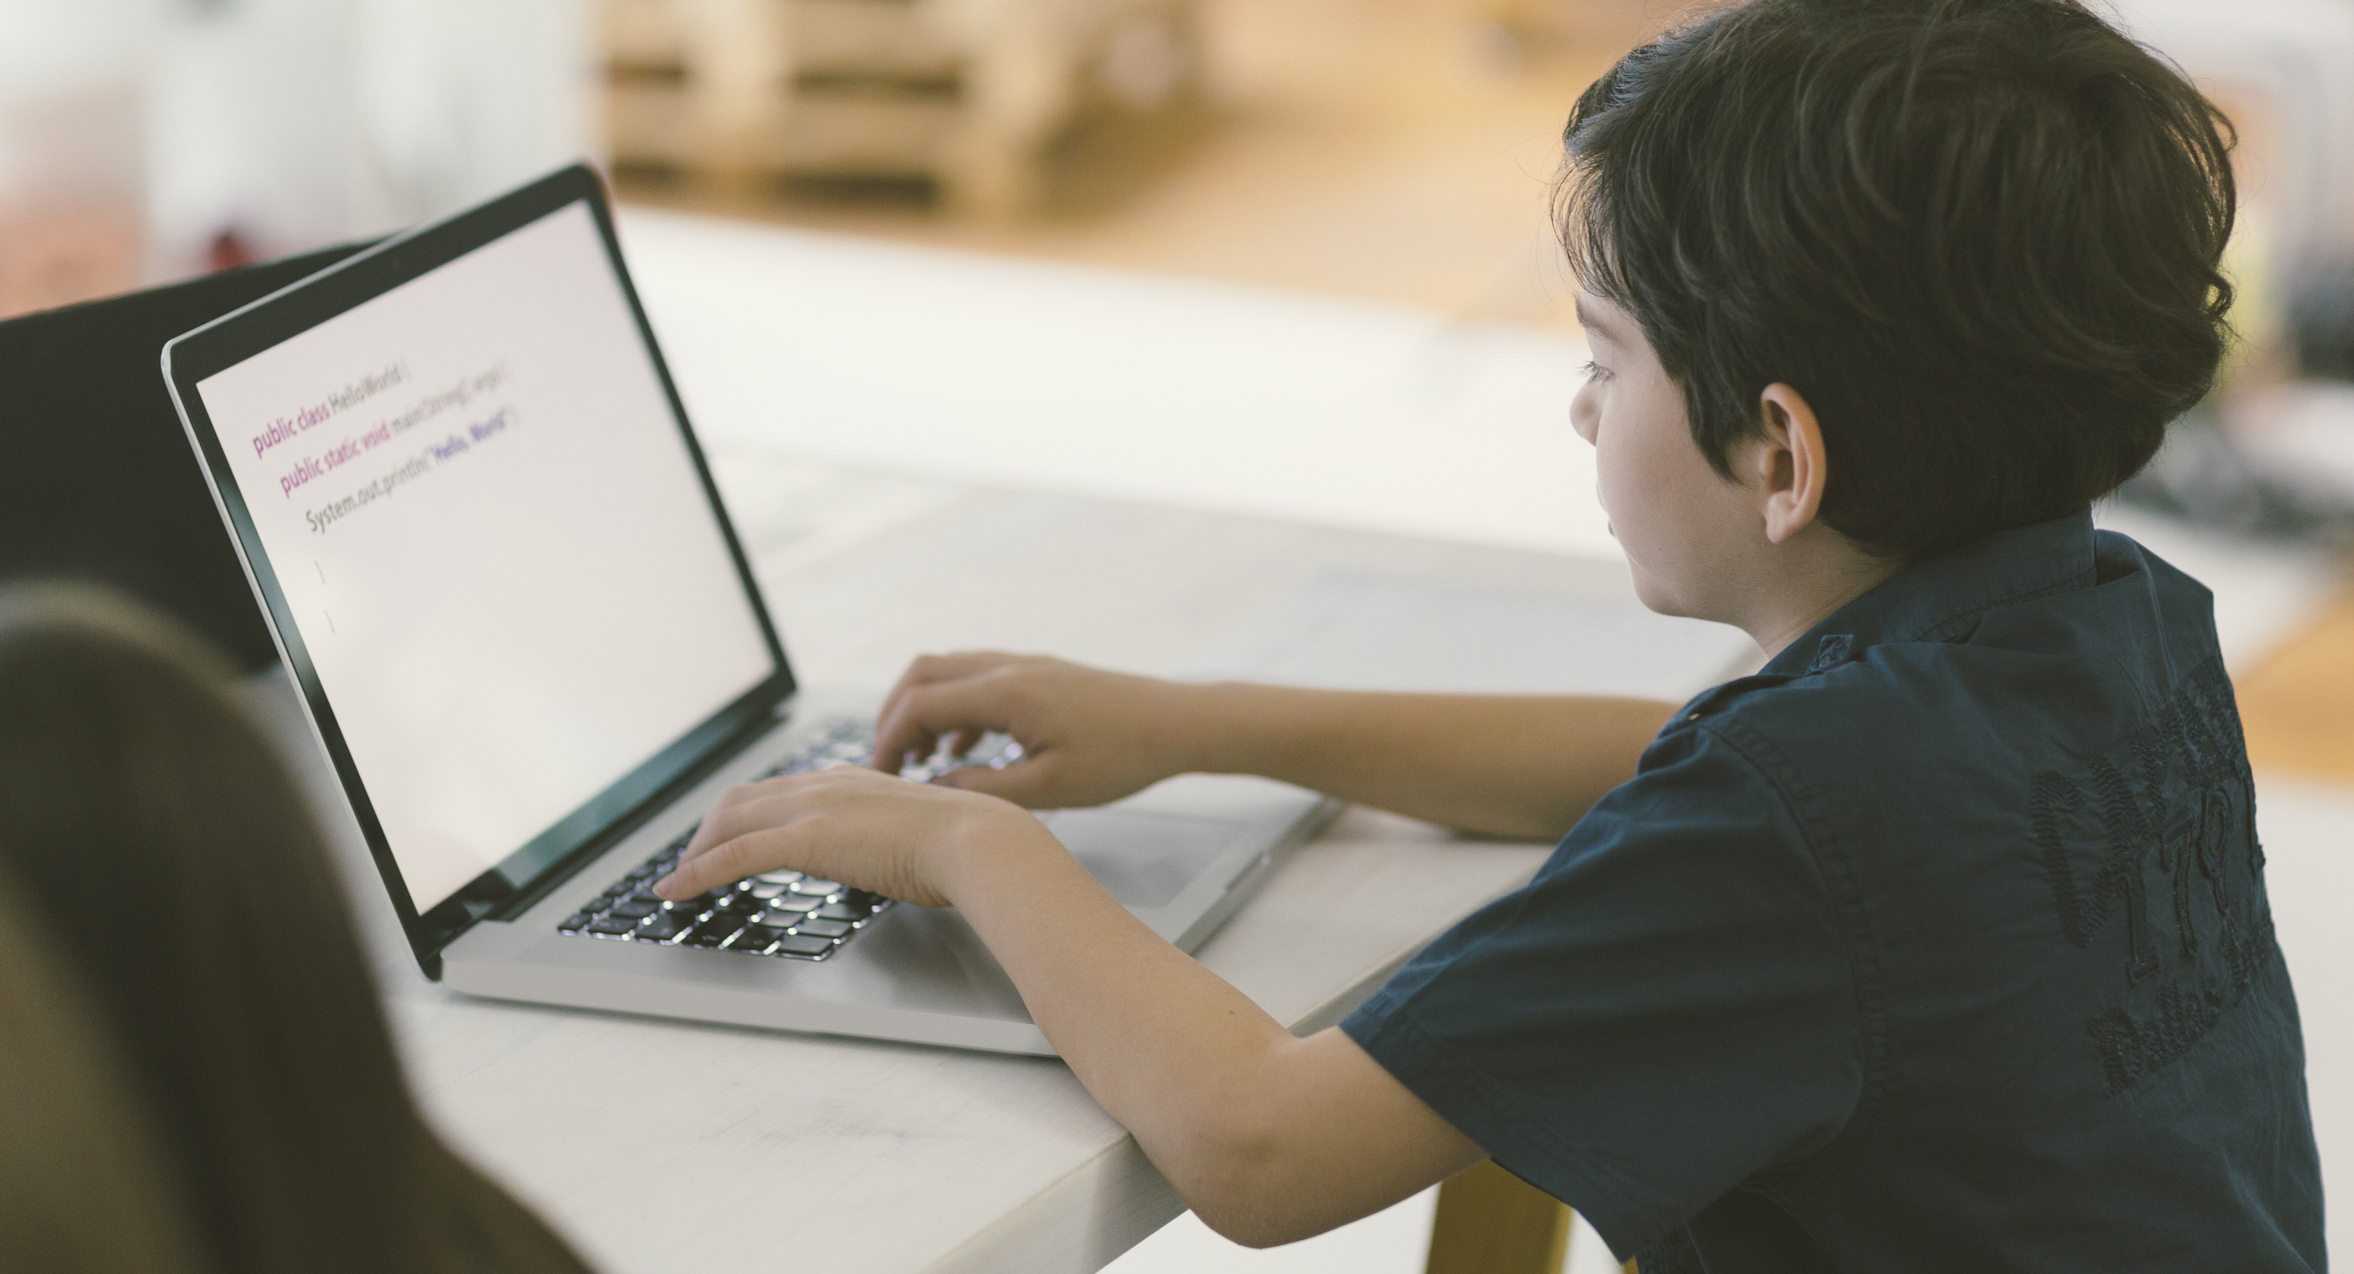 12 Questions To Ask When Choosing a Kids Online Coding Course